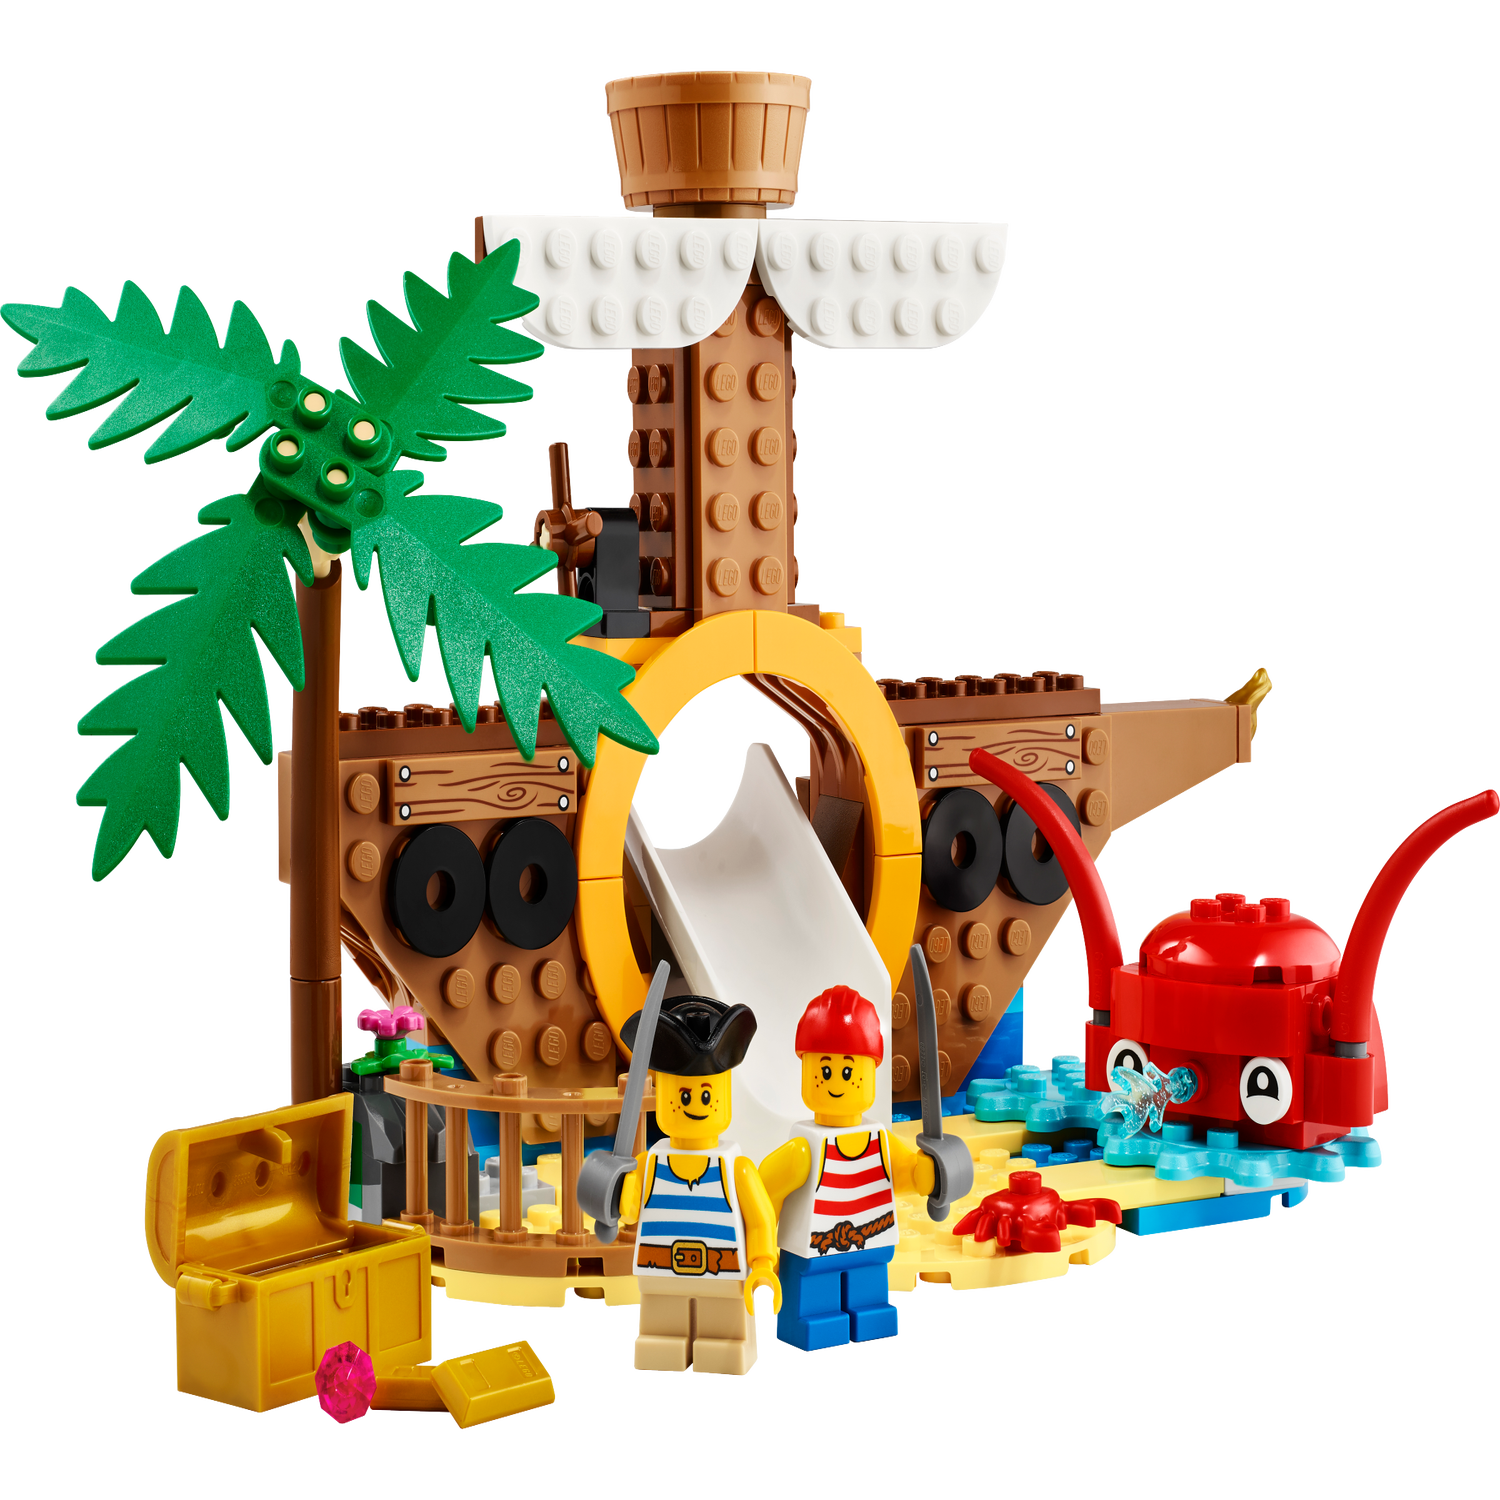 Pirate Ship Playground 40589, Other